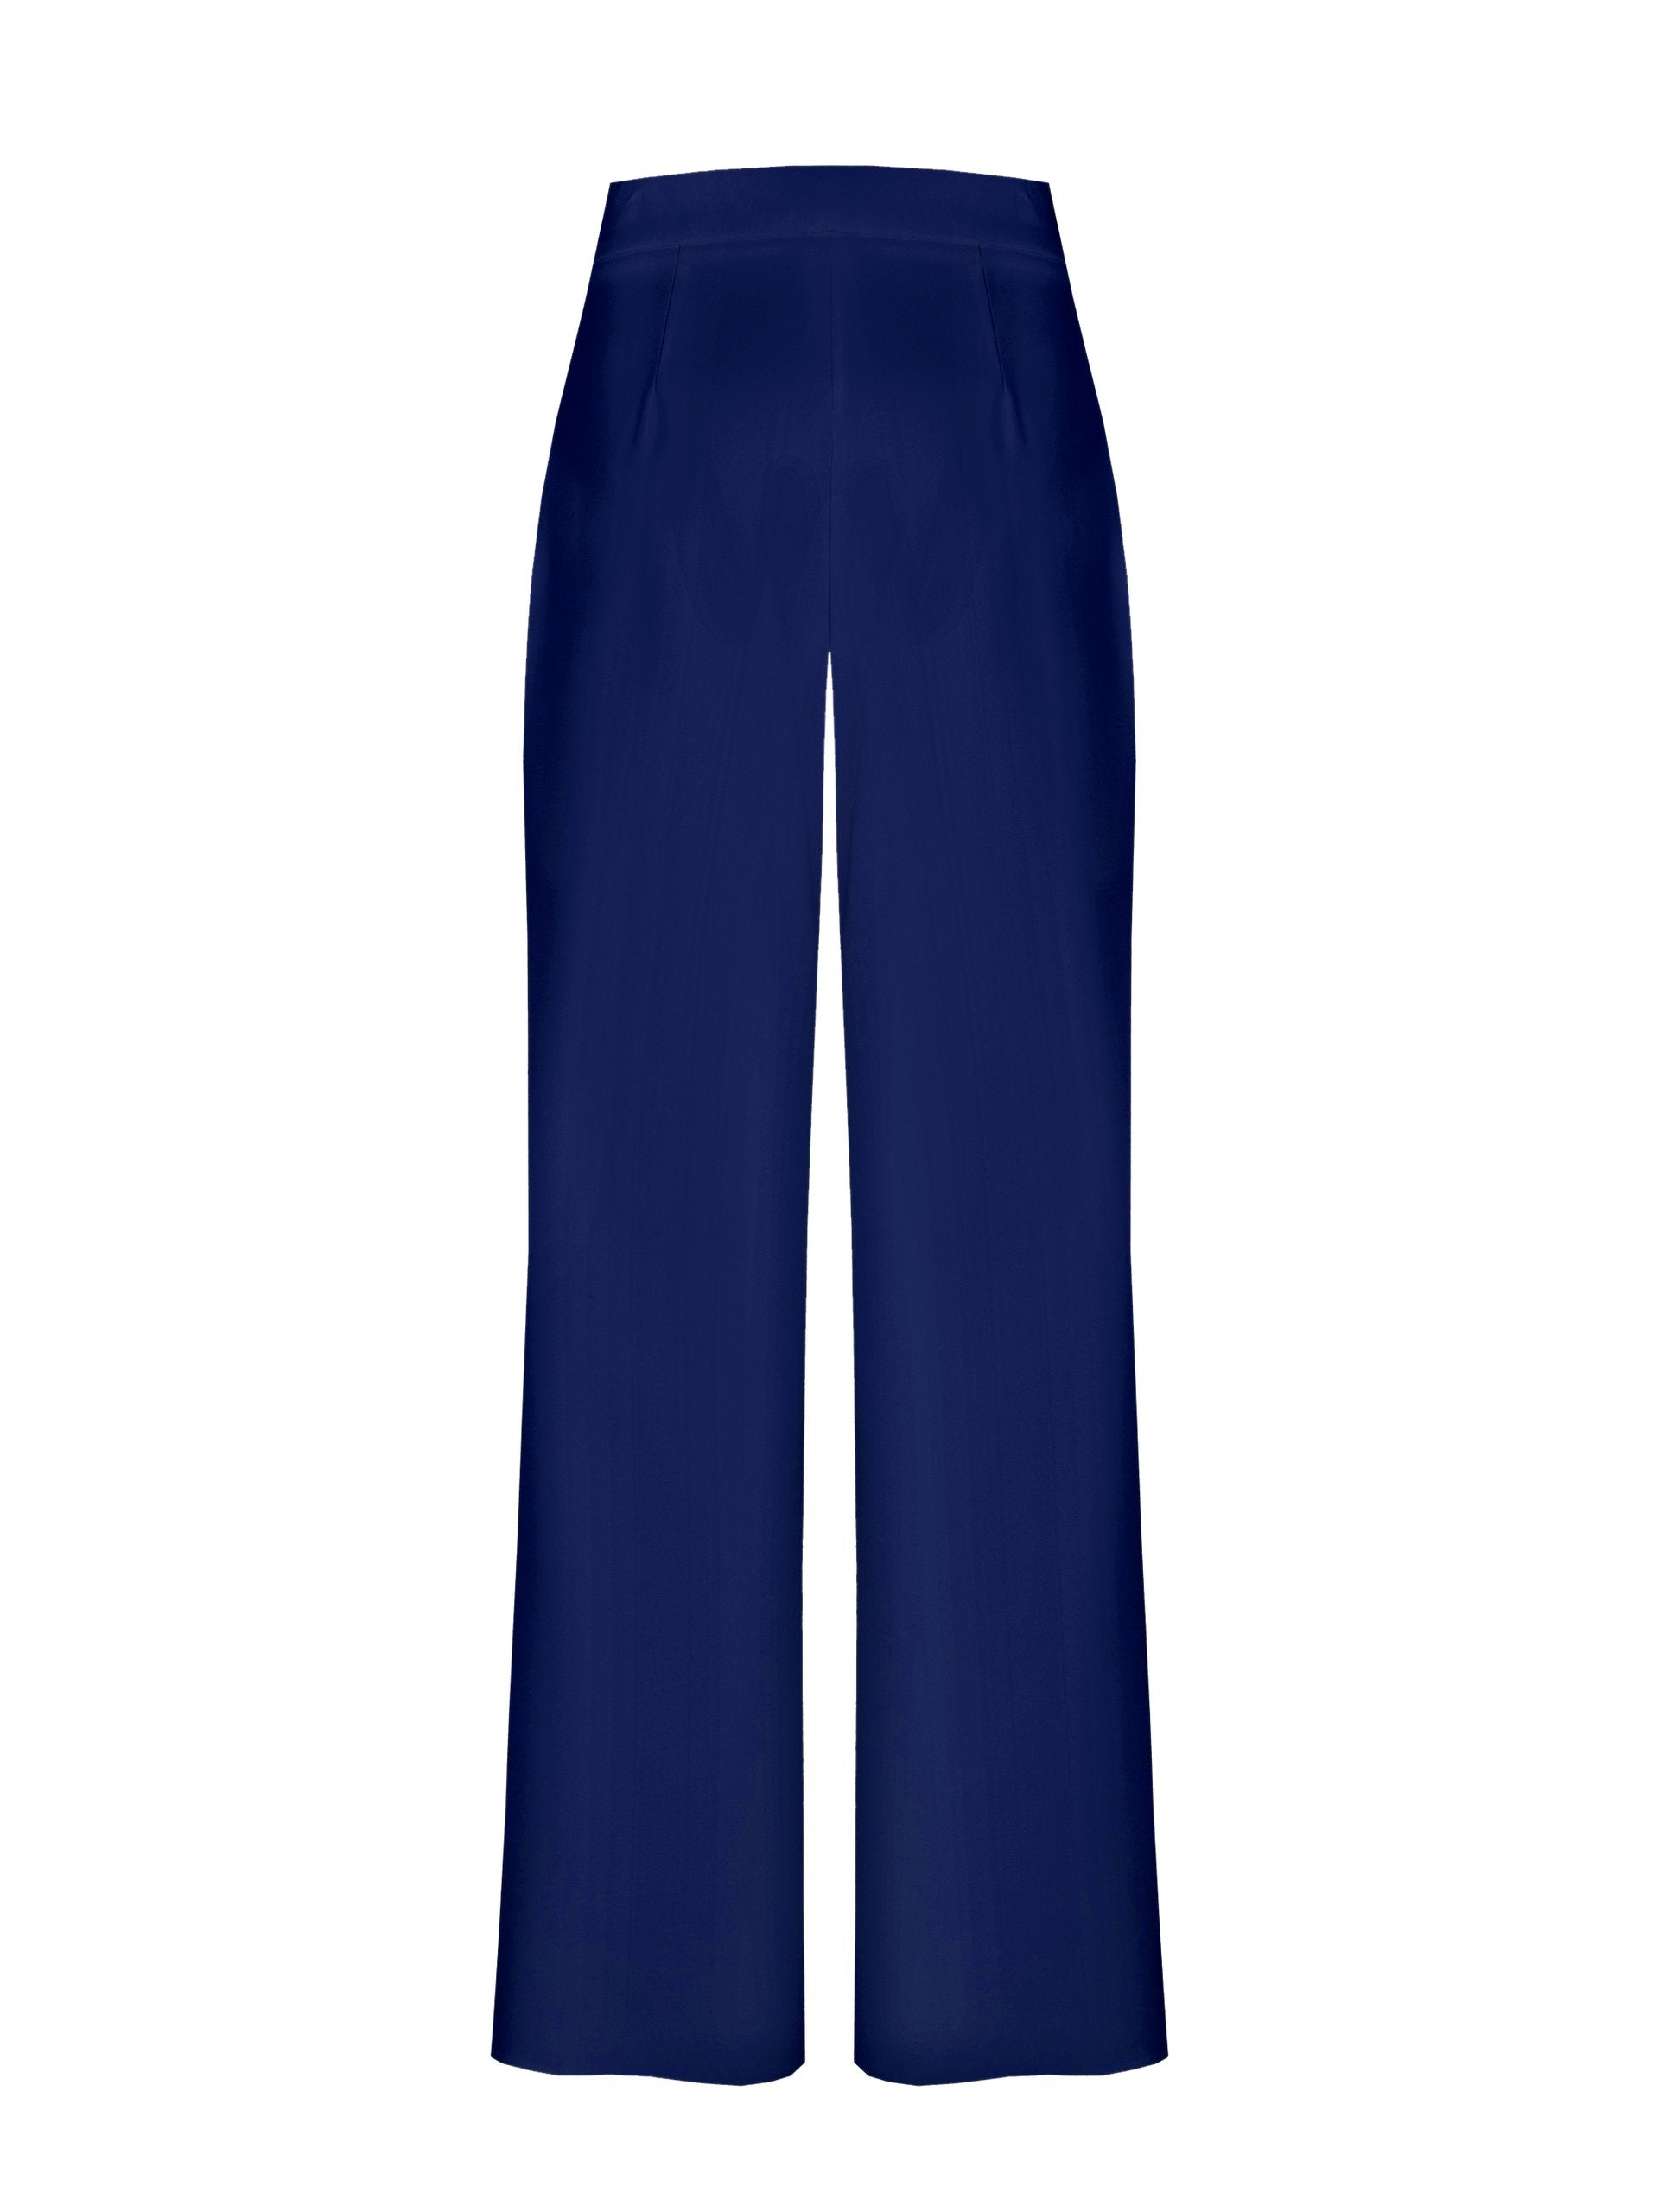 ZIA Tailored Pants